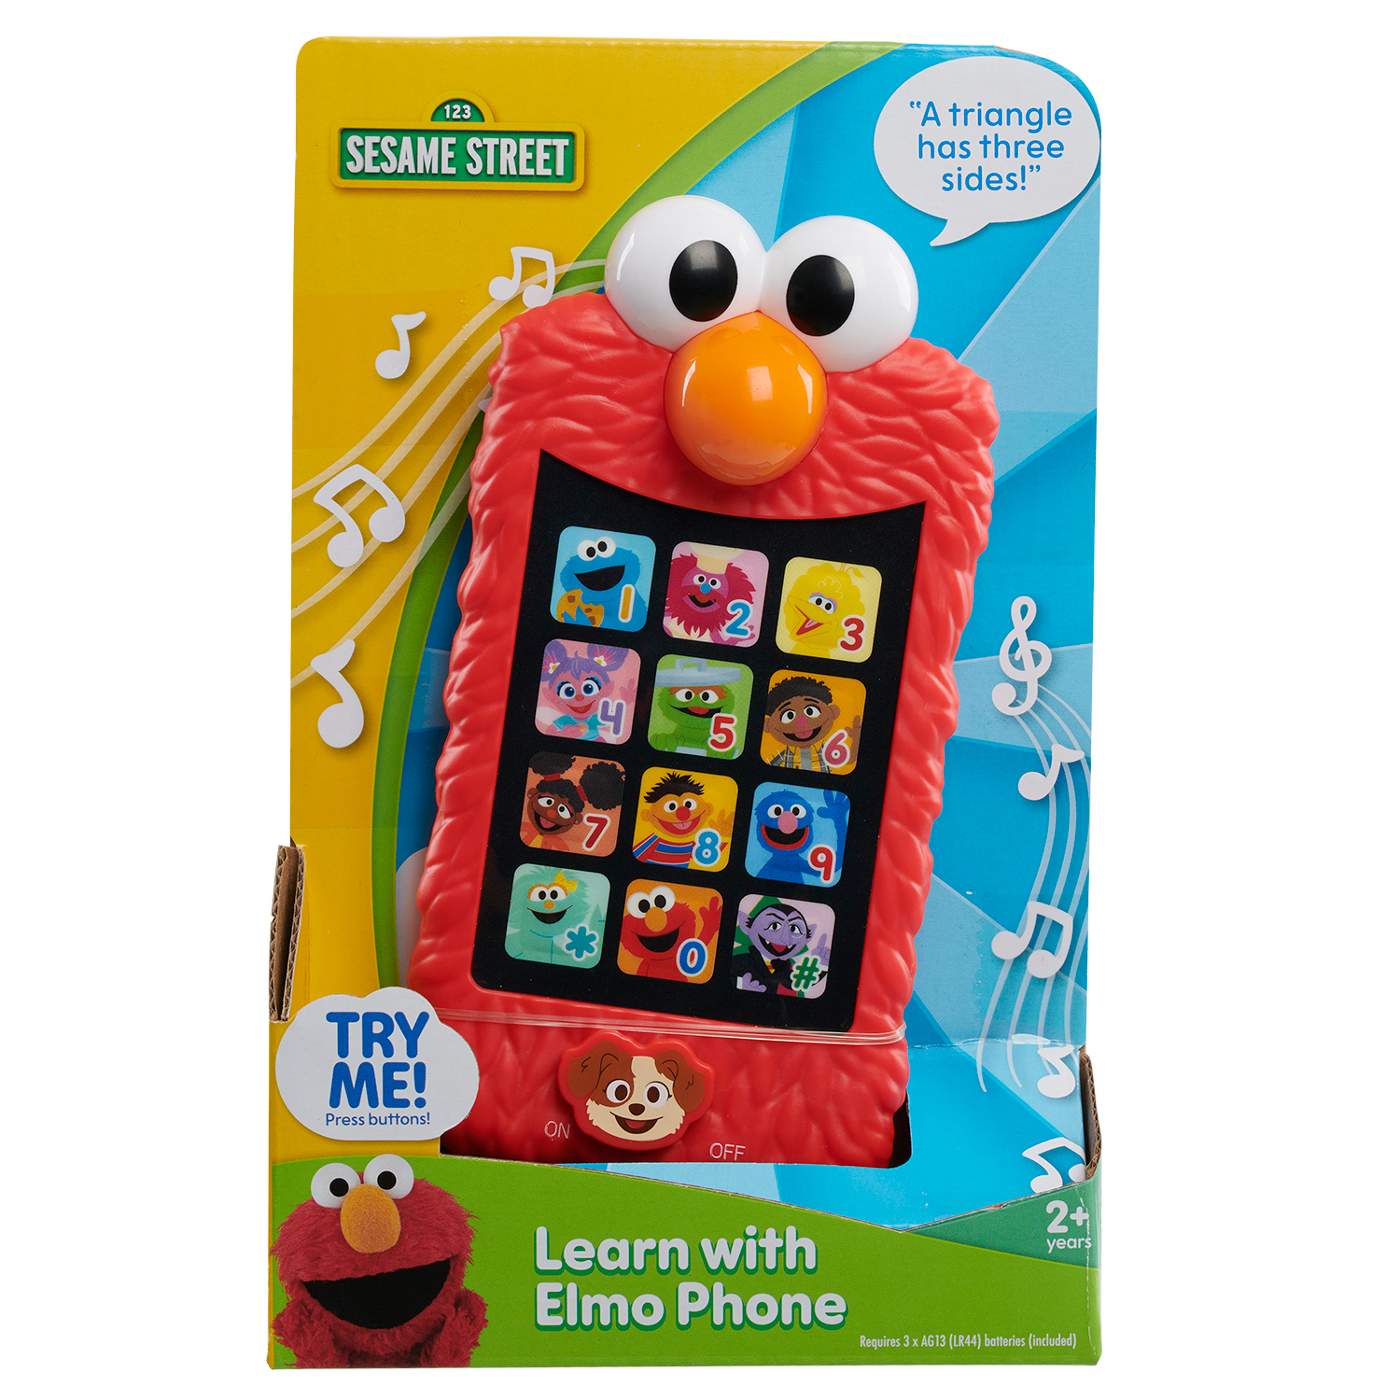 Sesame Street Learn with Elmo Phone; image 1 of 2